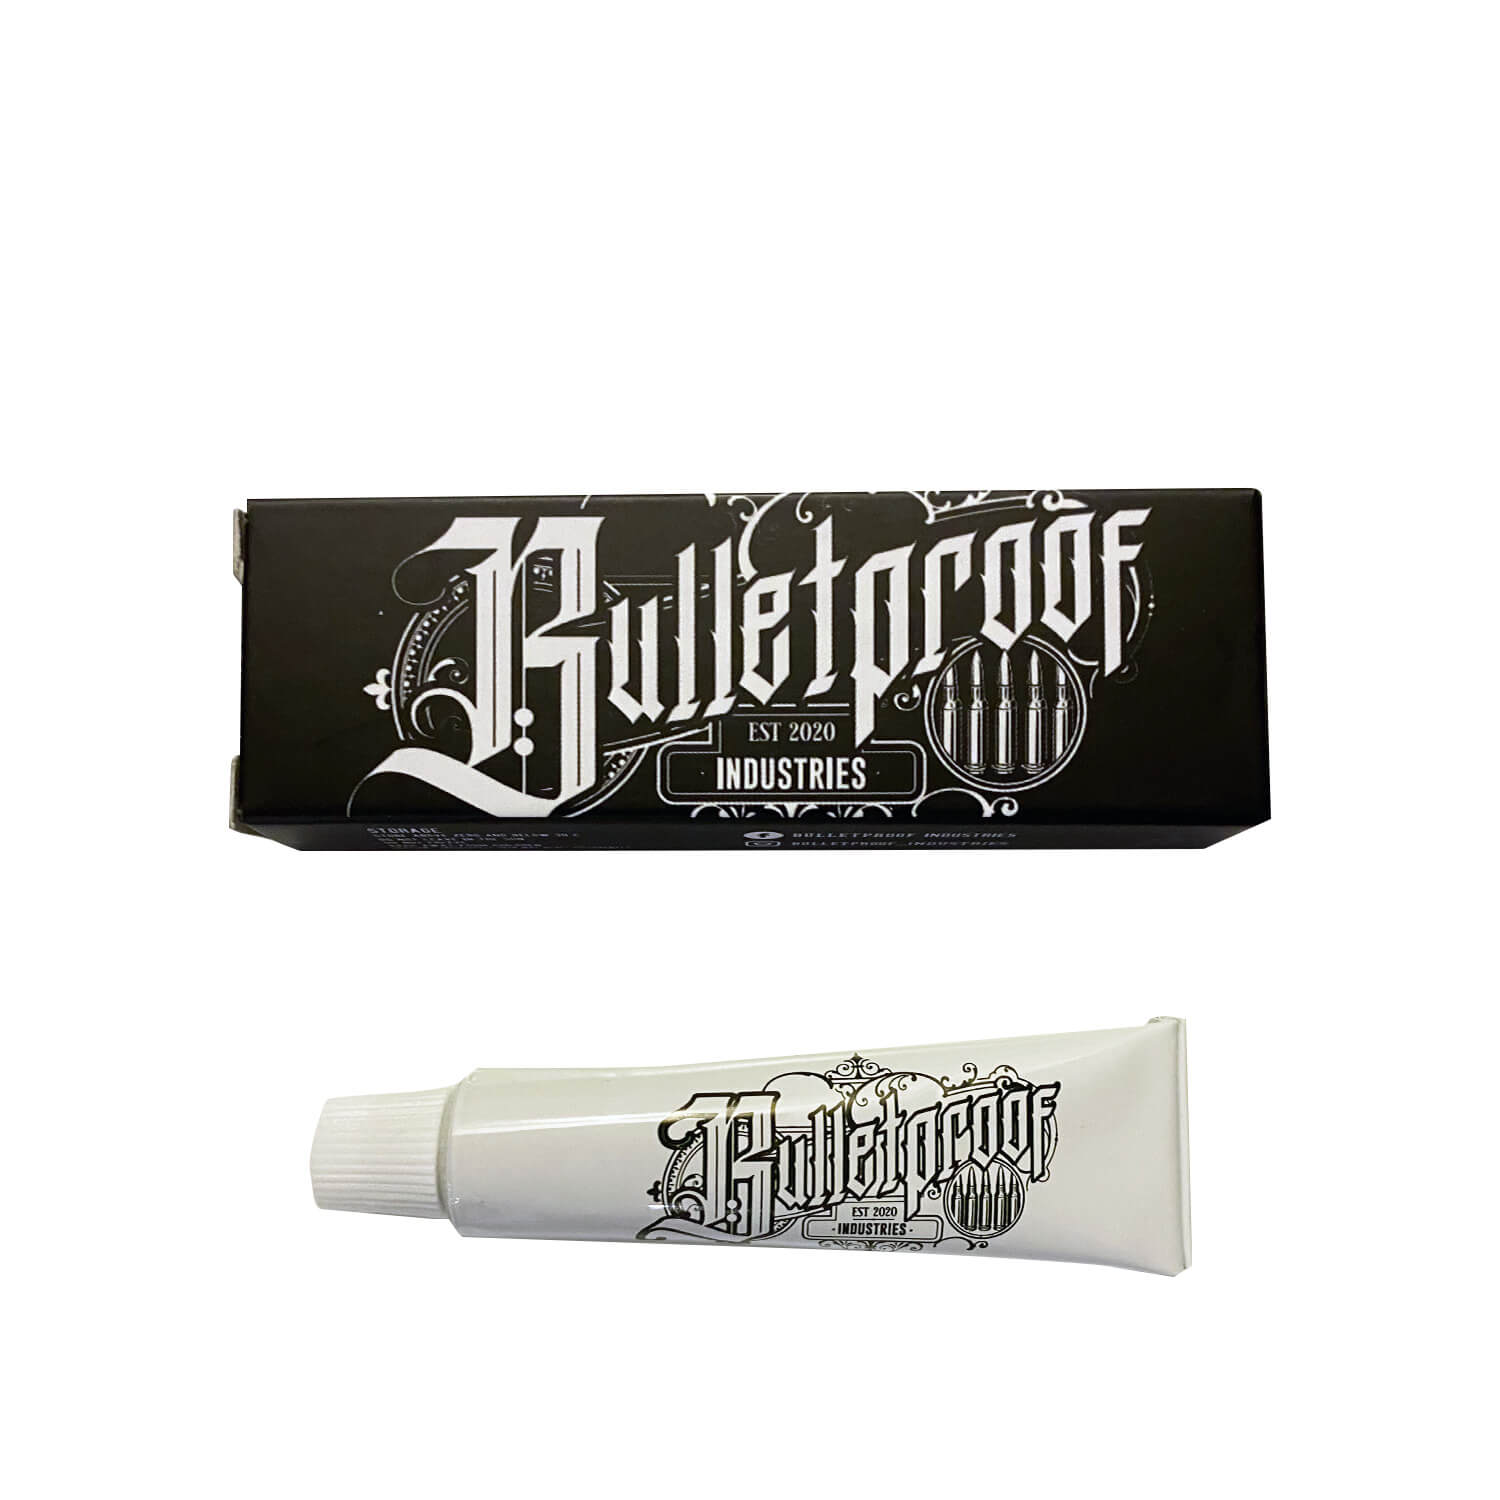 TattCare  Tattoo aftercare balm supported by Kiwi artists